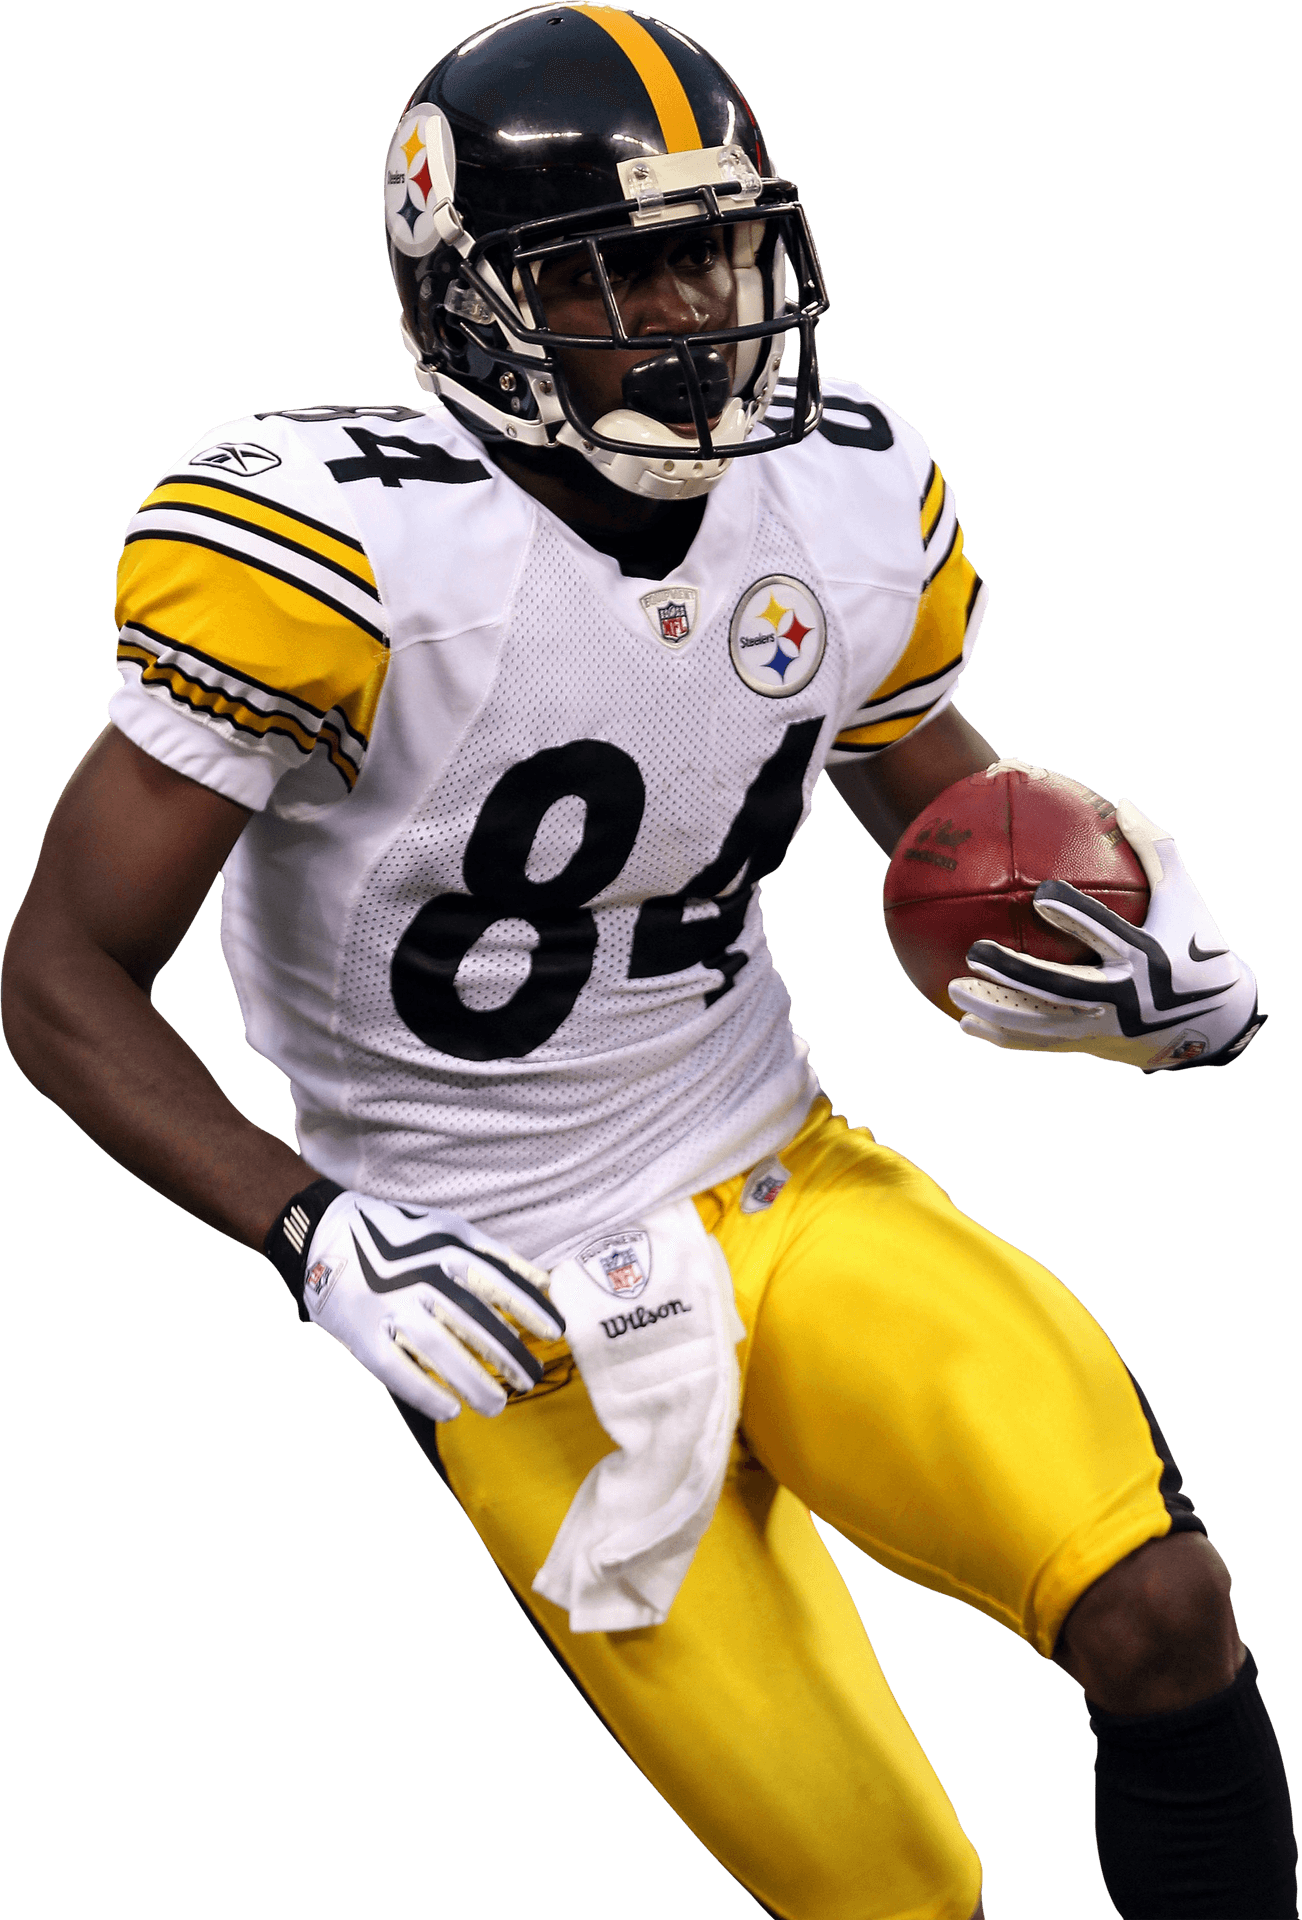 Steelers Player In Action.png PNG